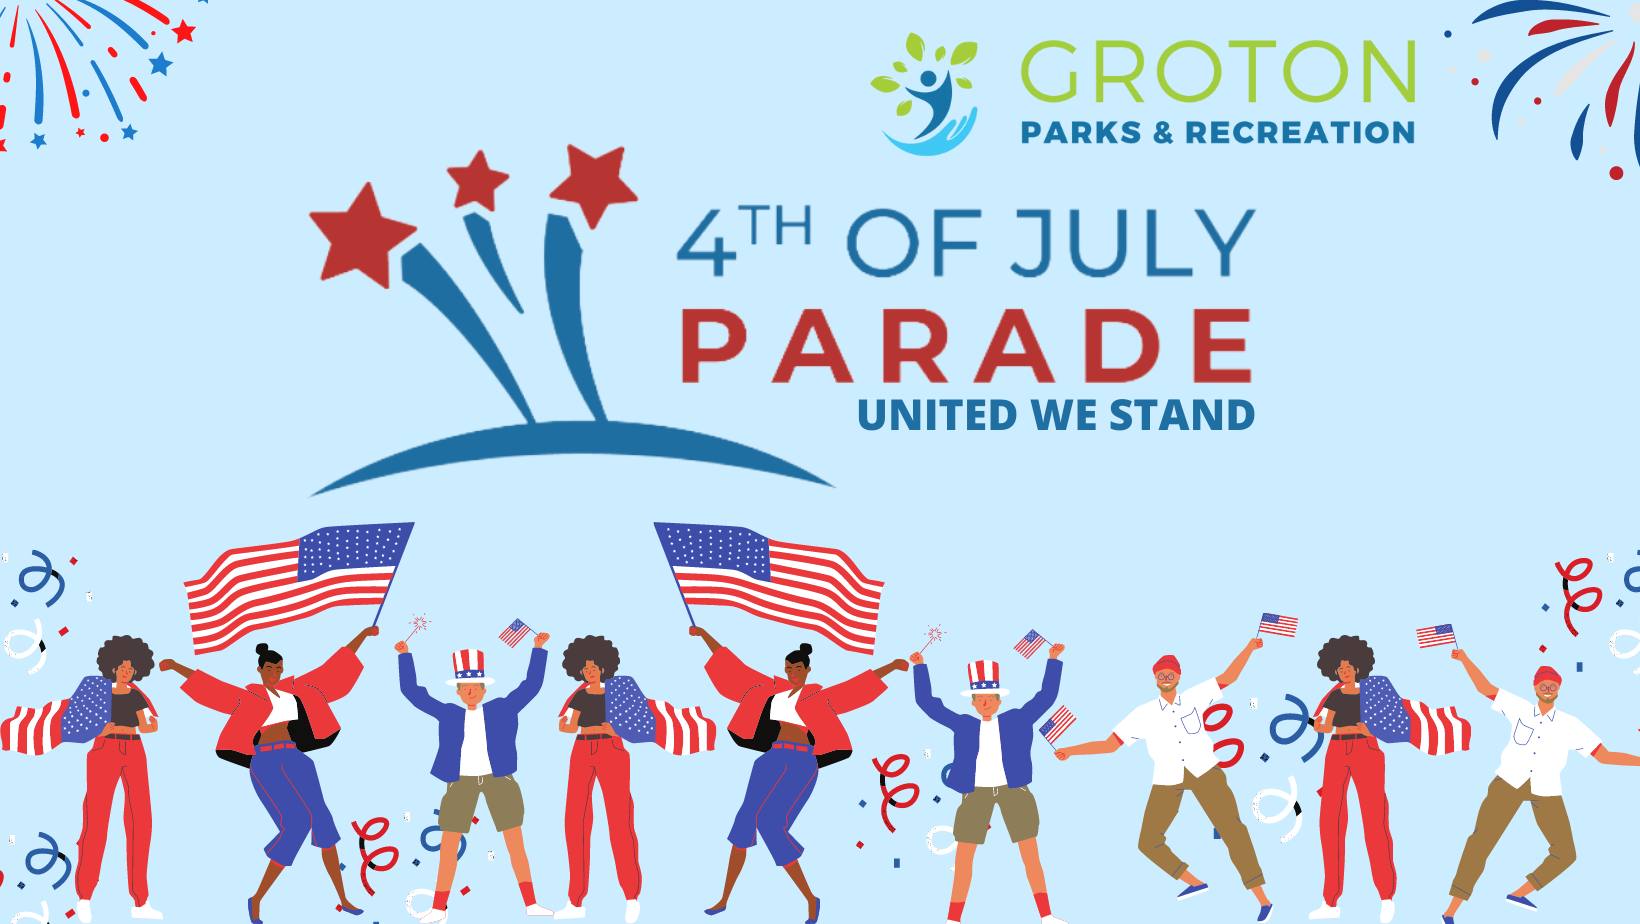 Groton's Annual 4th of July Parade